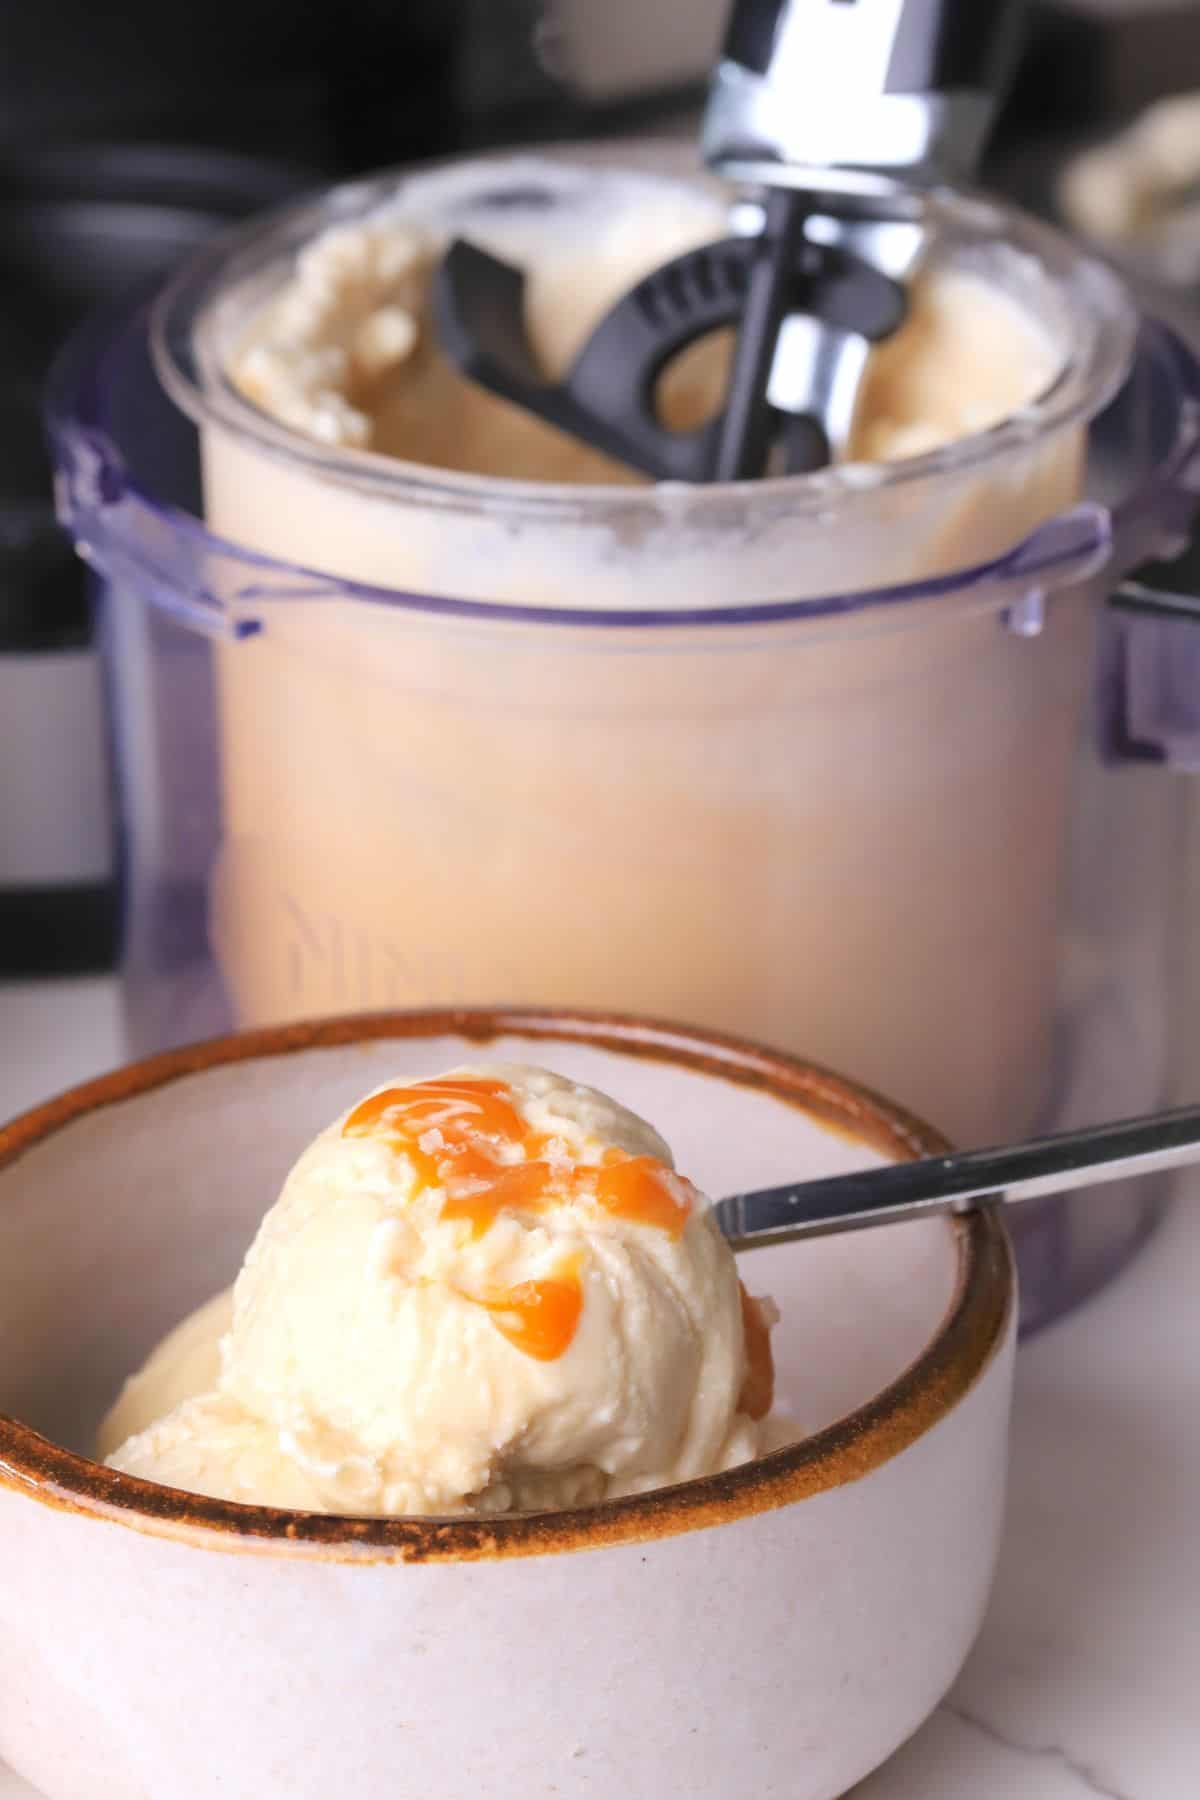 Sugar free salted caramel ice cream in a bowl next to a creami pint with an ice cream scoop.